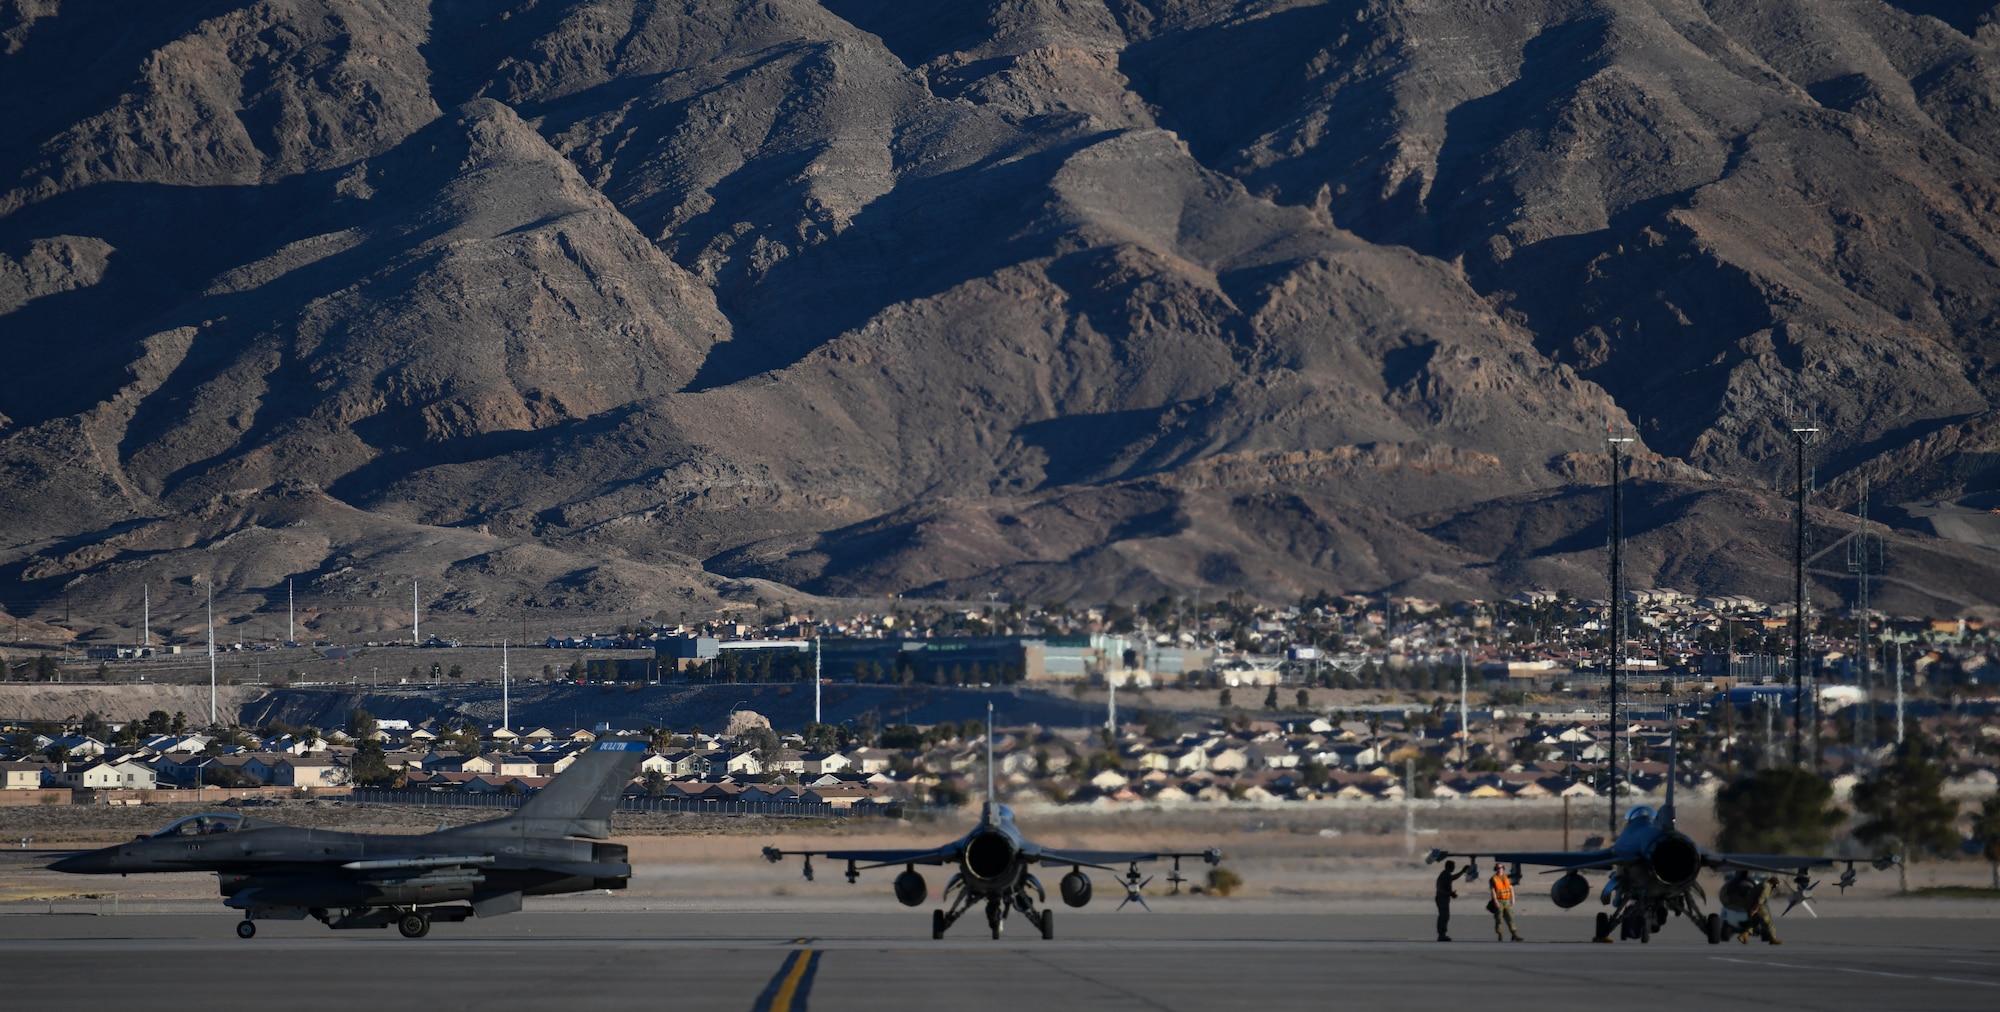 U.S. Air Force F-16 Crew Chiefs assigned to the 148th Fighter Wing, Minnesota Air National Guard, Duluth, Minn., perform routine checks at the end of runway prior to launching Block 50 F-16CM Fighting Falcons at Nellis Air Force Base, Nev., Feb 8, 2022, while participating in Red Flag 22-1.